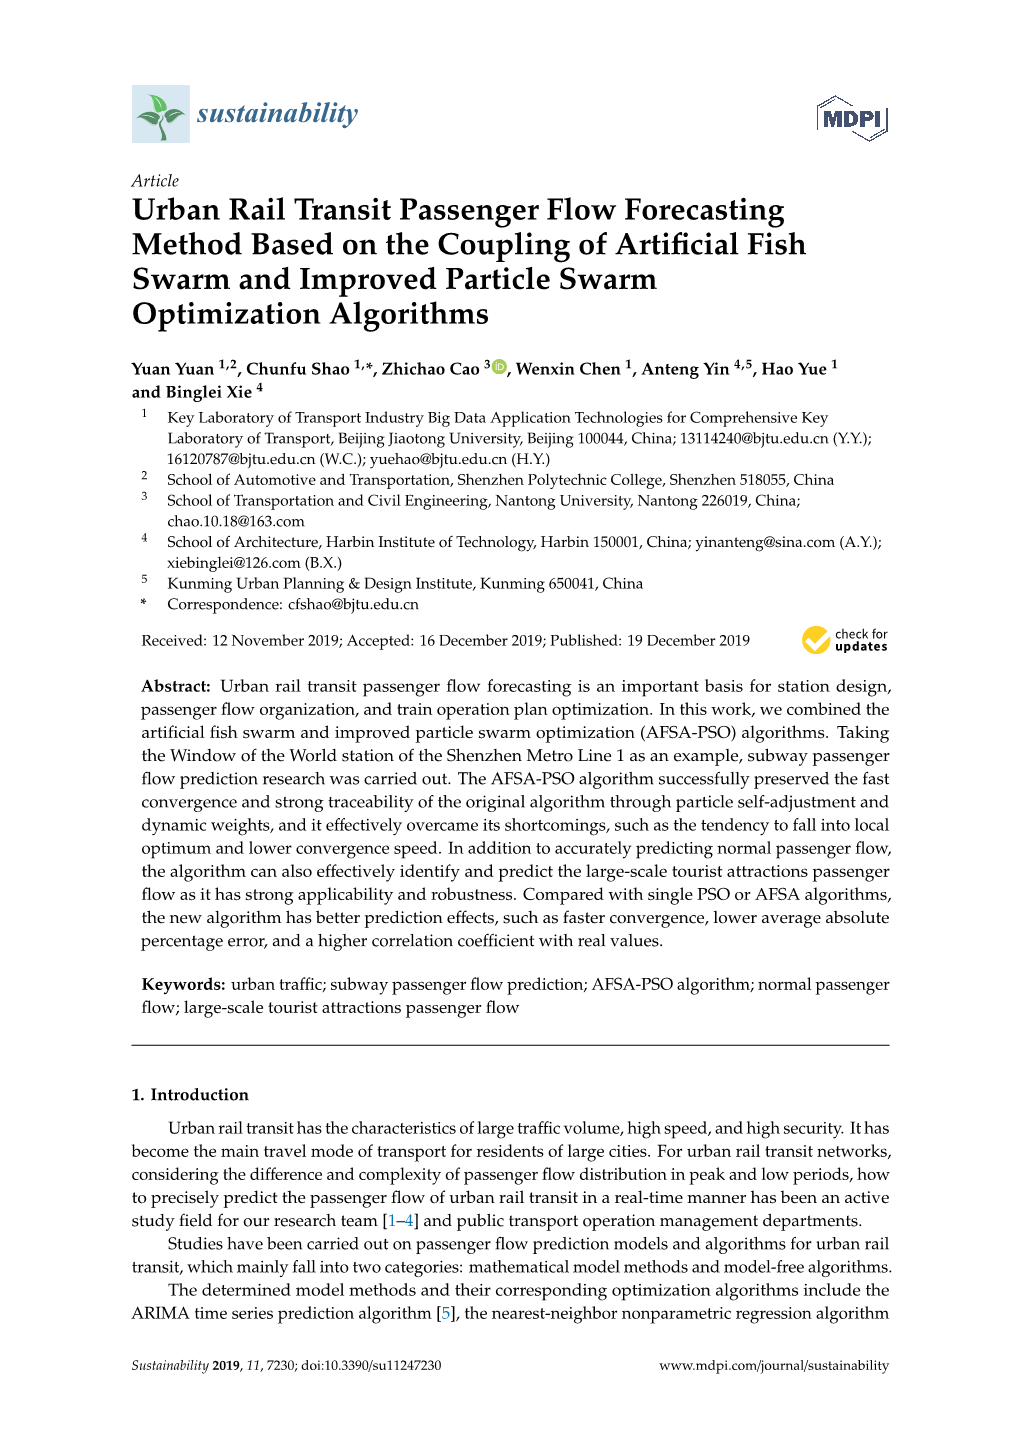 Urban Rail Transit Passenger Flow Forecasting Method Based on the Coupling of Artiﬁcial Fish Swarm and Improved Particle Swarm Optimization Algorithms